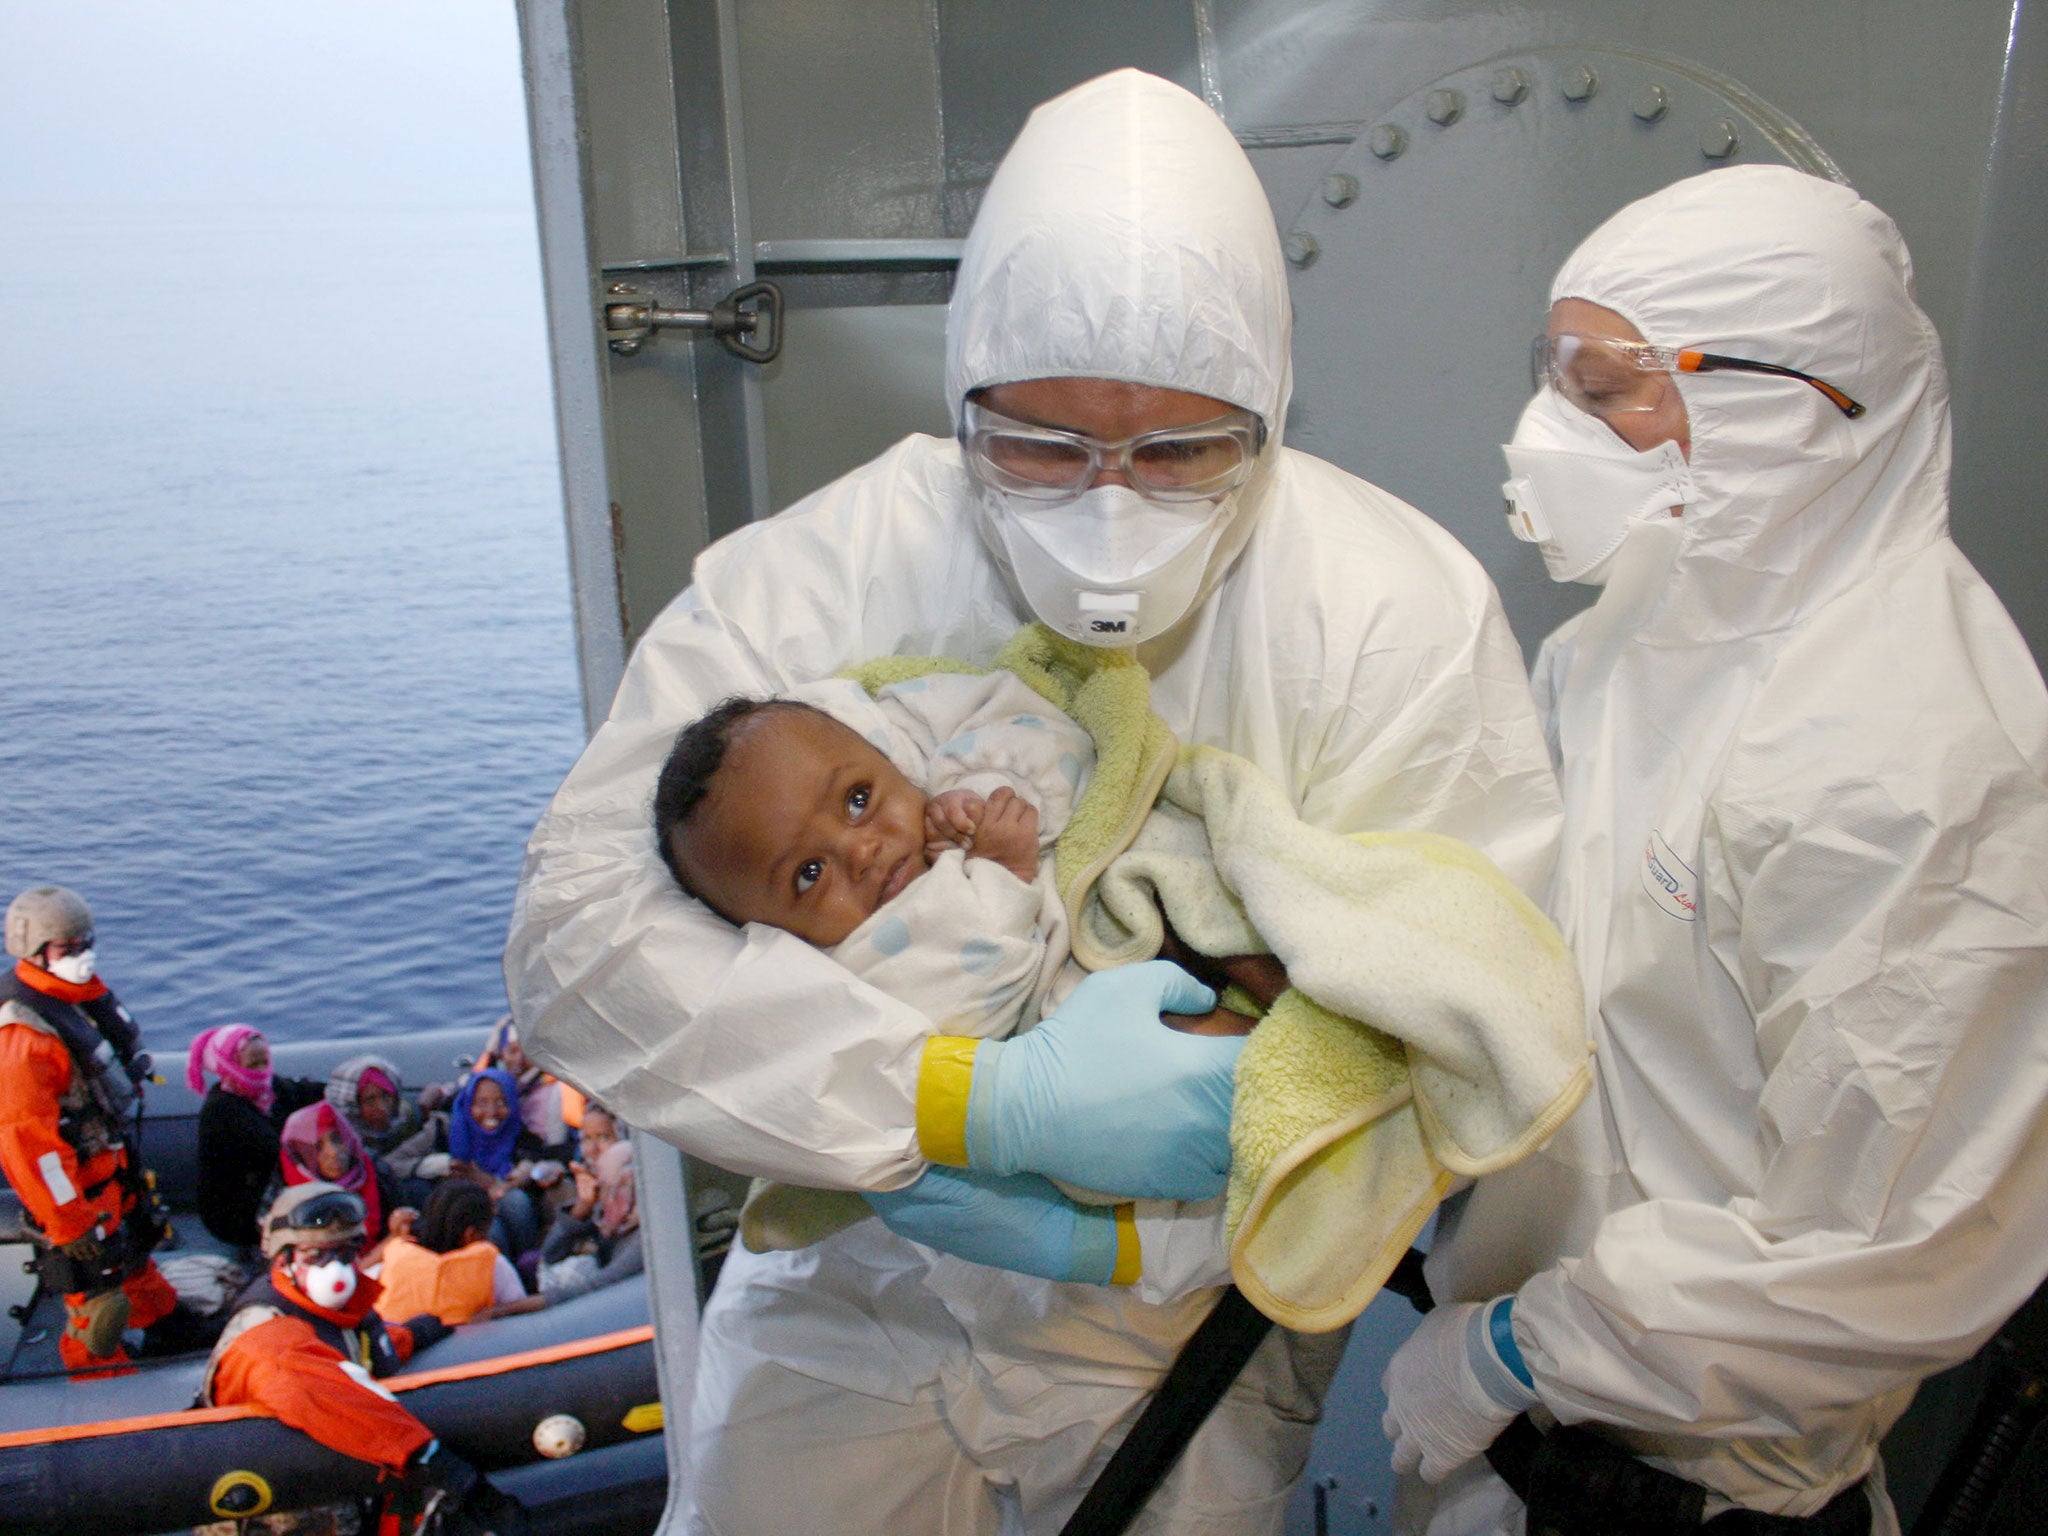 Rescuers treat a migrant baby on the frigate ‘Hessen’, off the coast of Libya